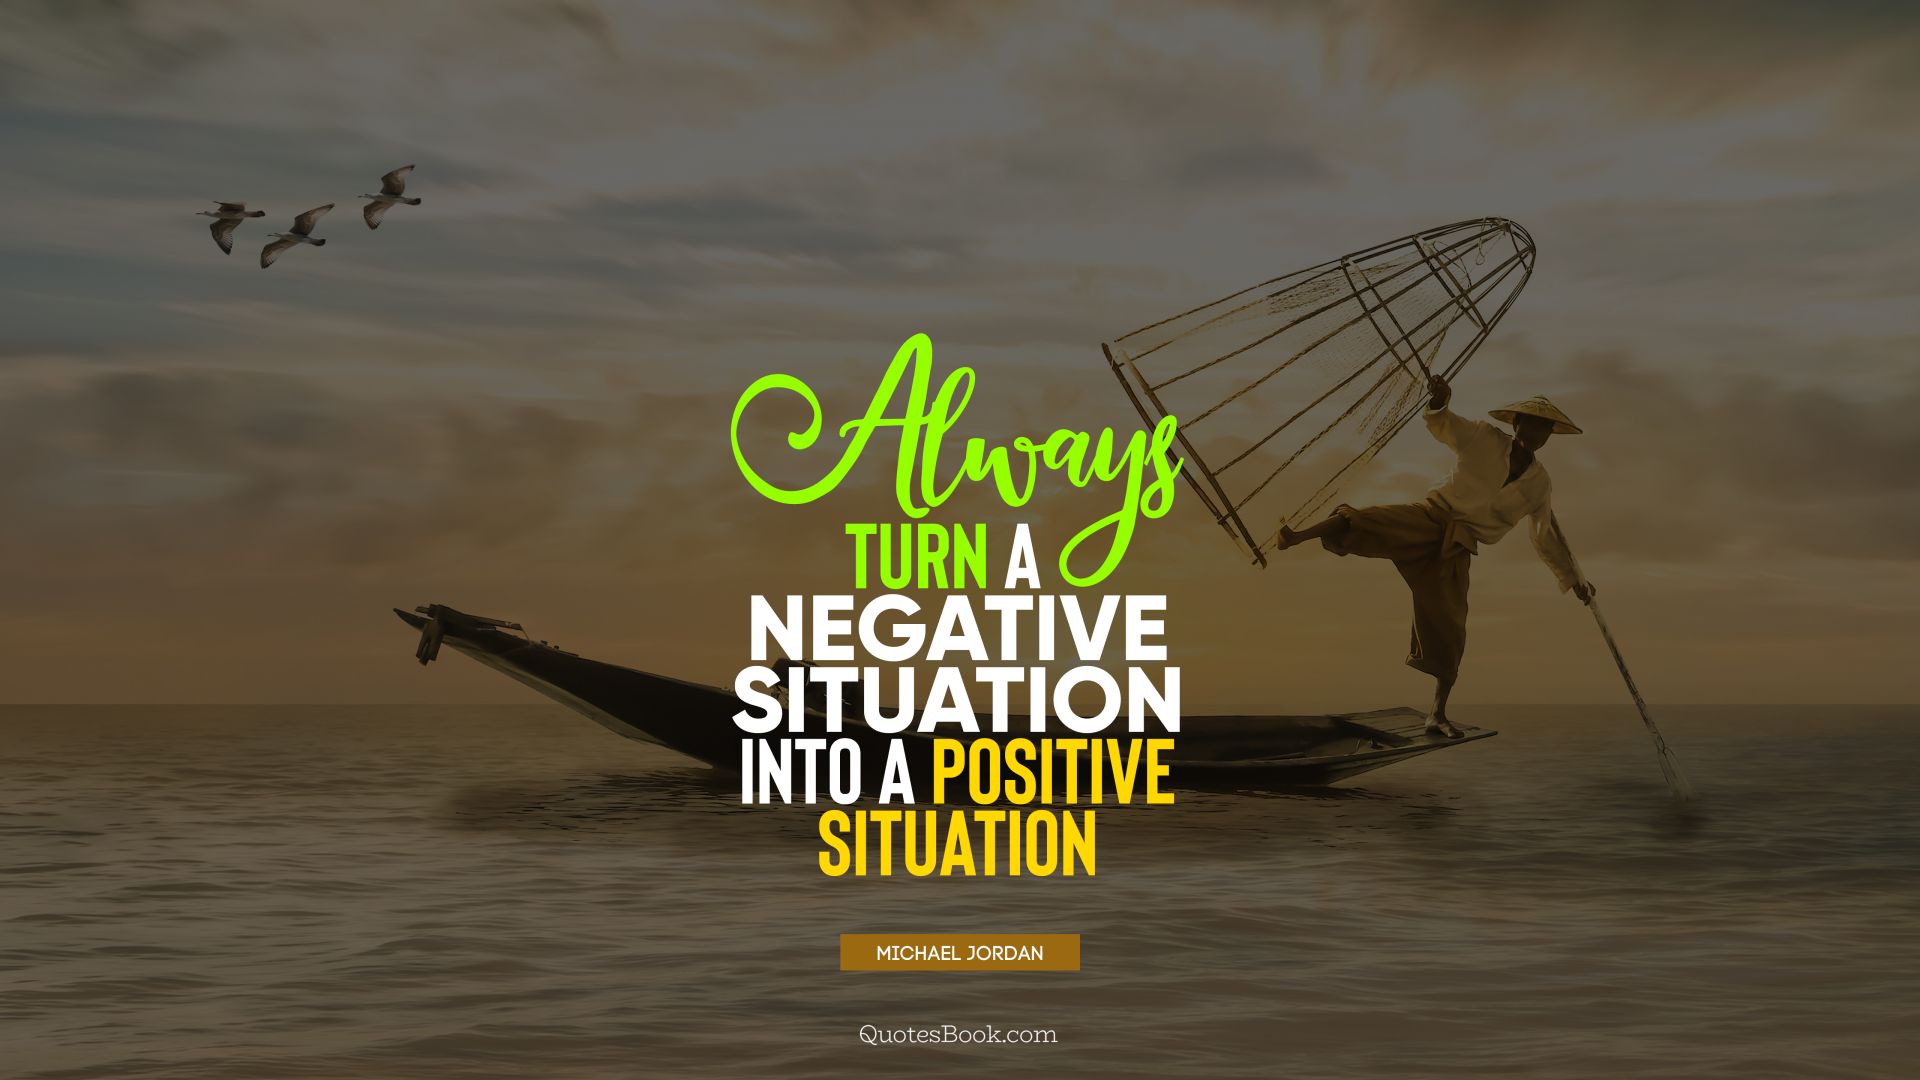 Always turn a negative situation into a positive situation. - Quote by Michael Jordan